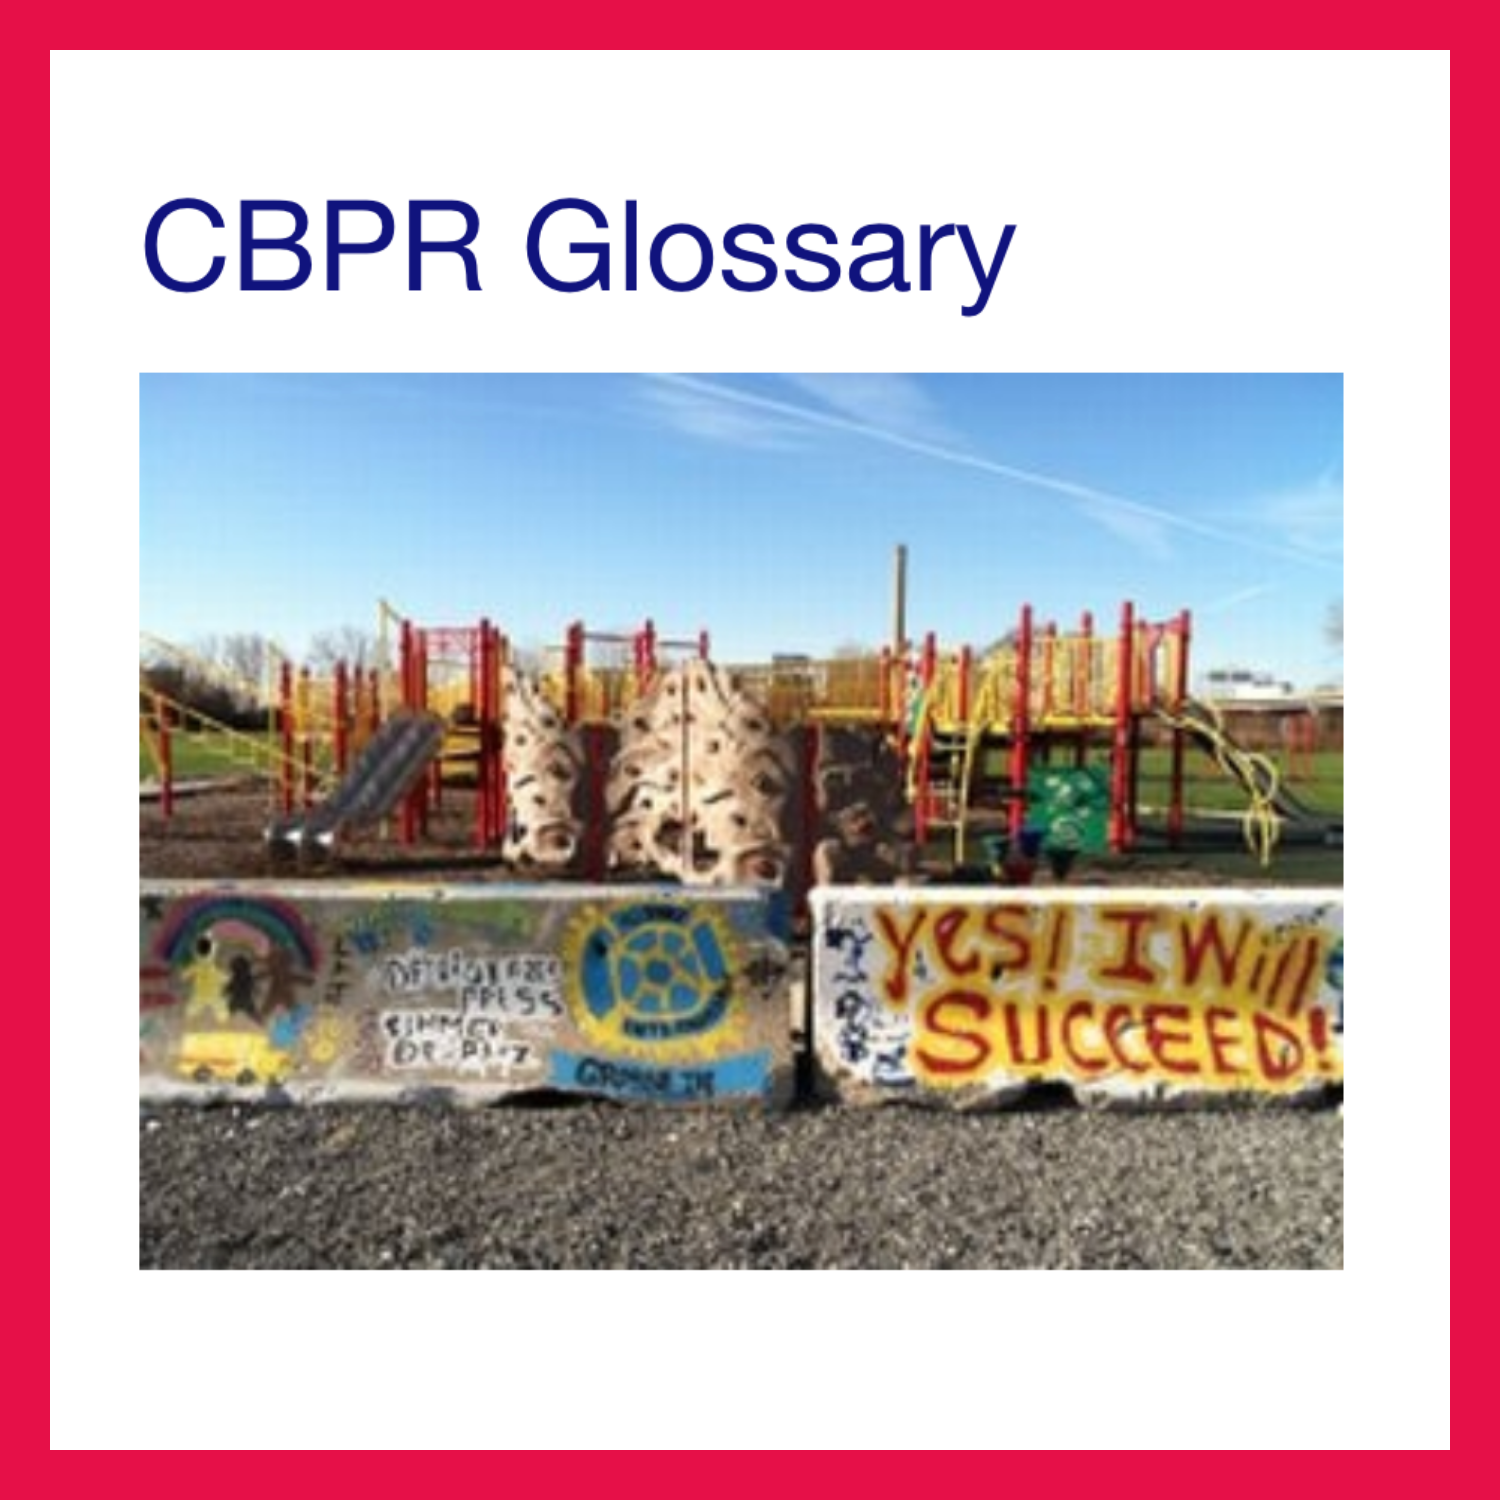 Photo of a children's playground with graffiti on the wall that says "Yes! I will Succeed!". Above the photo is the title "CBR Glossary".